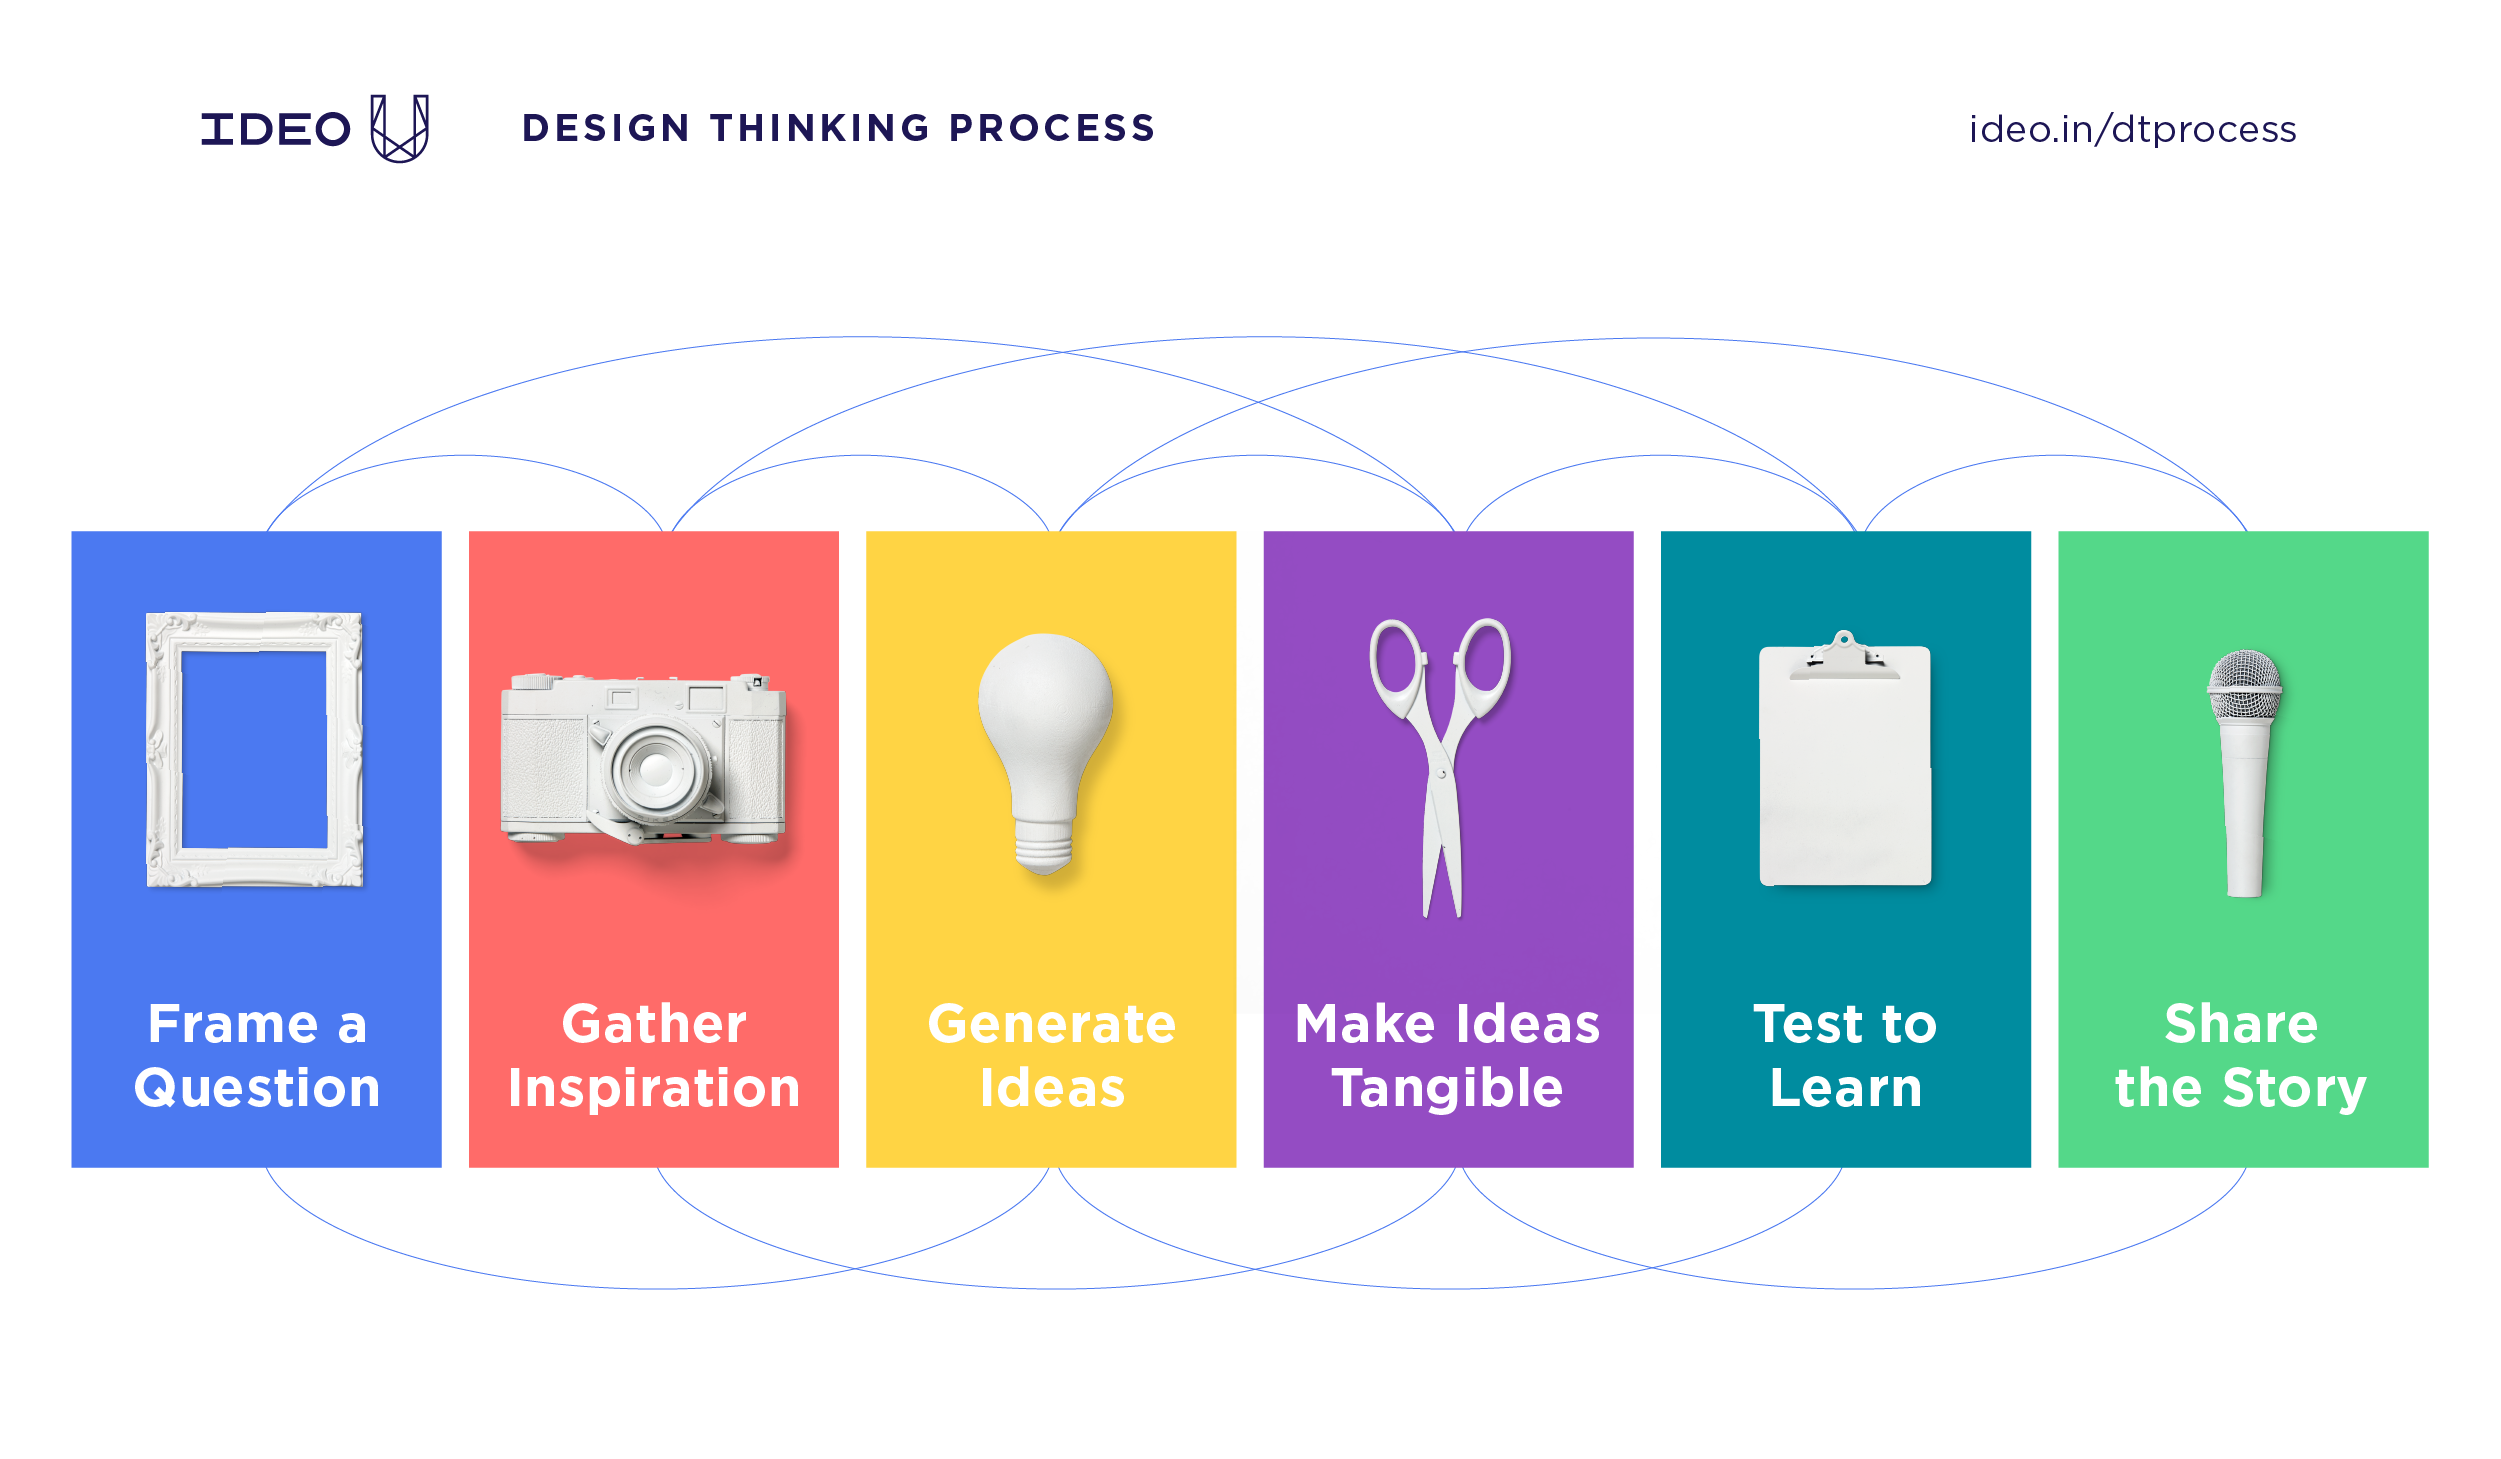 Empathetic design: the first stage of design thinking